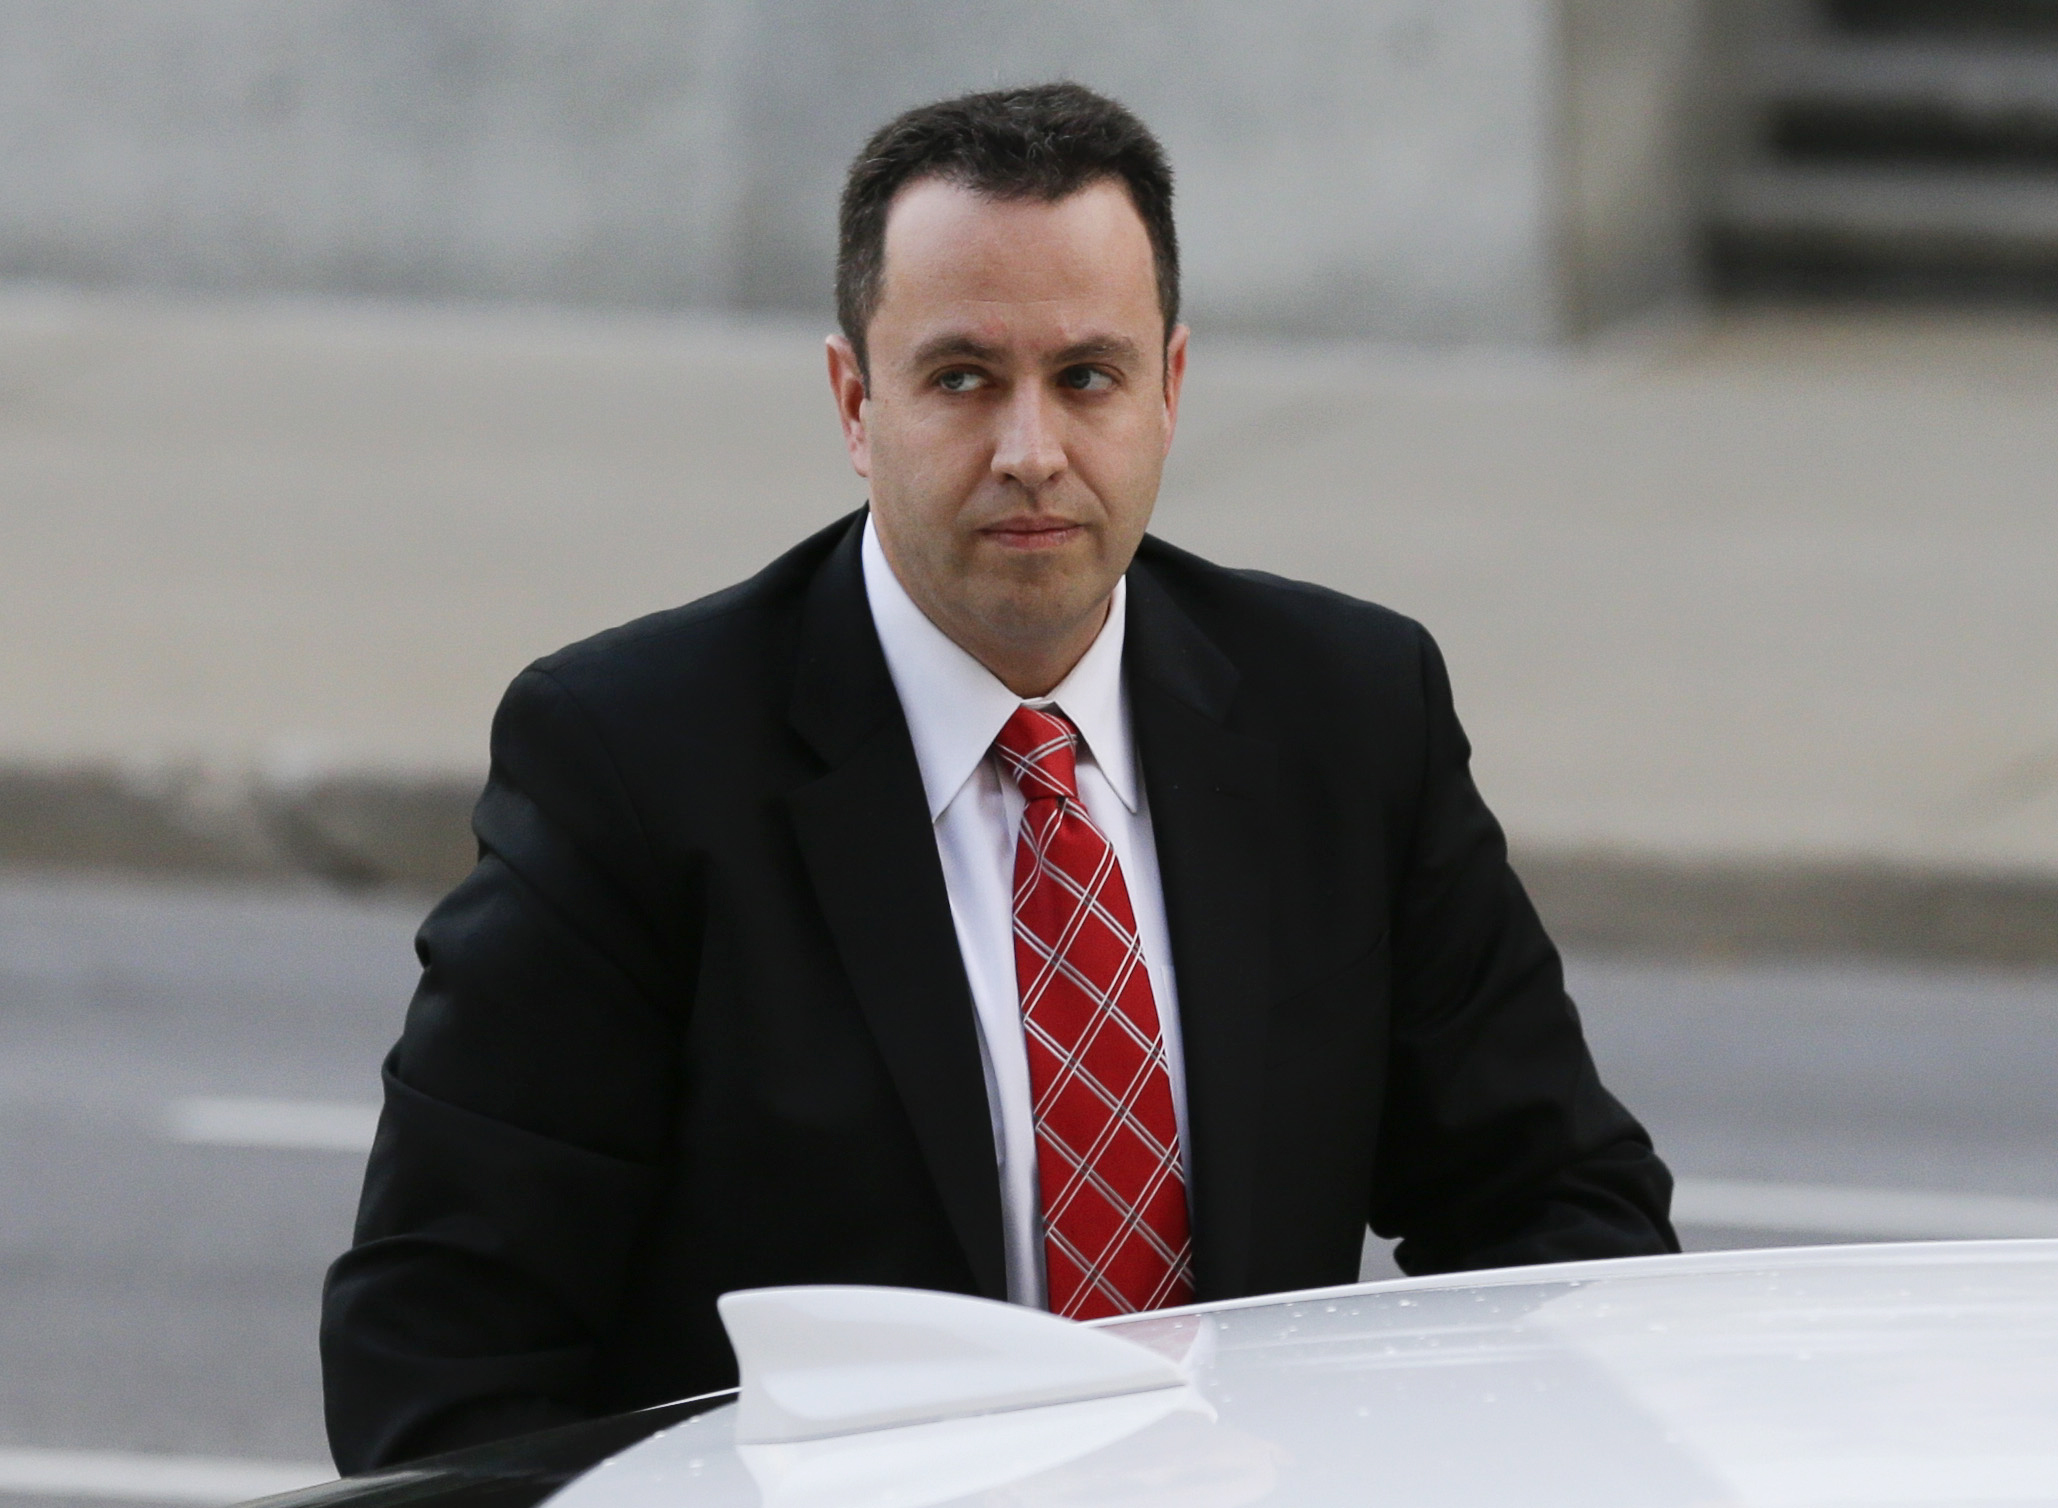 Former Subway pitchman Jared Fogle arrives at the federal courthouse in Indianapolis on Nov. 19, 2015.